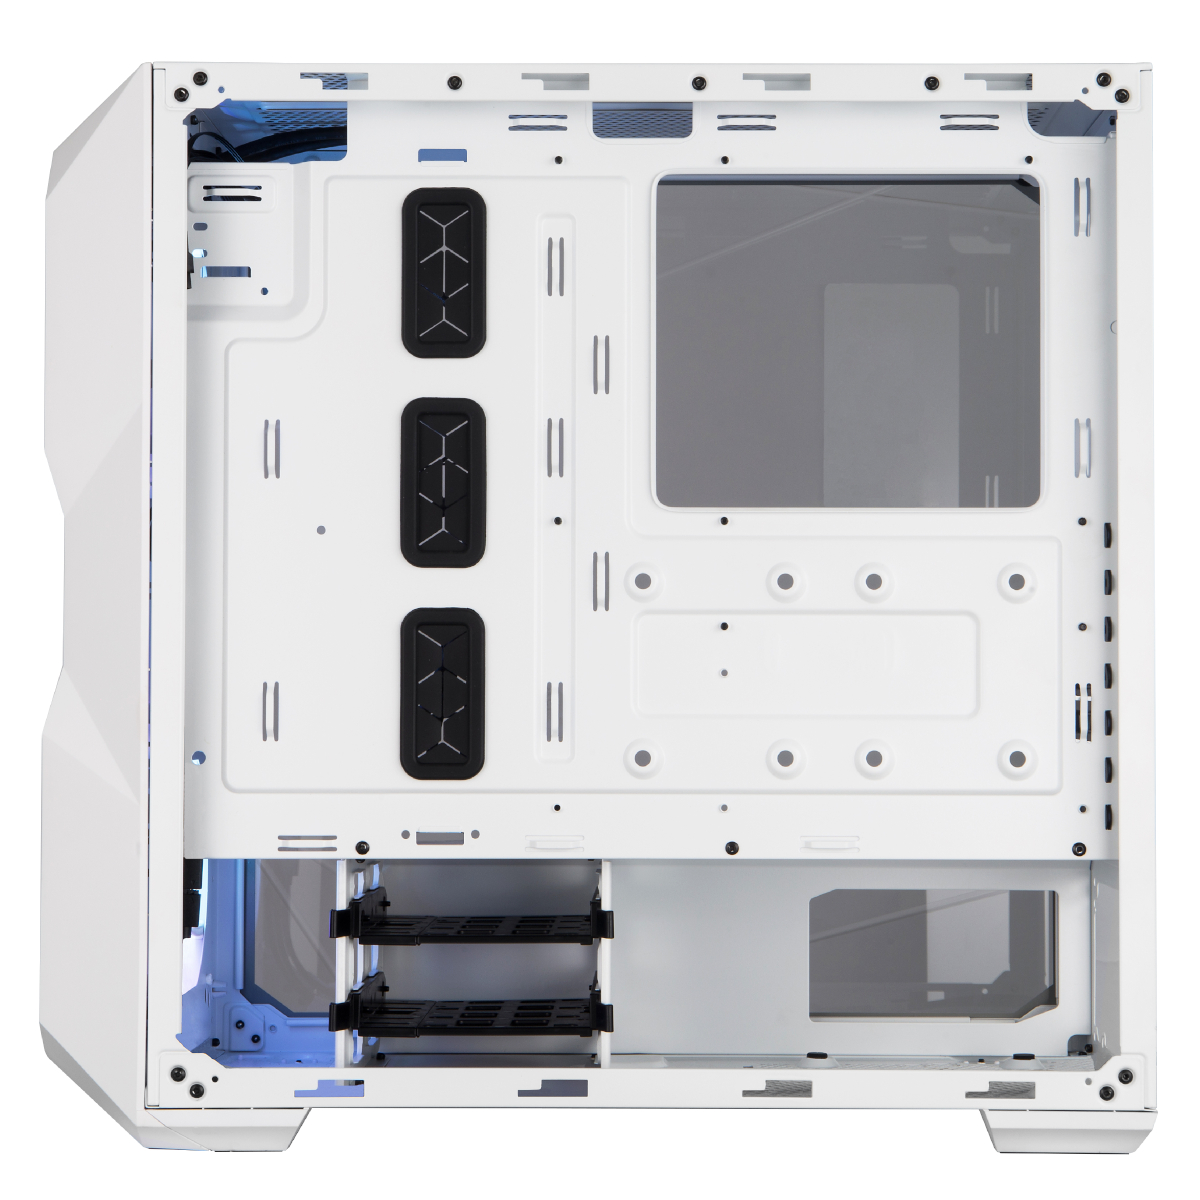 Cooler Master - CoolerMaster MasterBox TD500 Mesh Mid-Tower E-ATX Case - White Tempered Gla